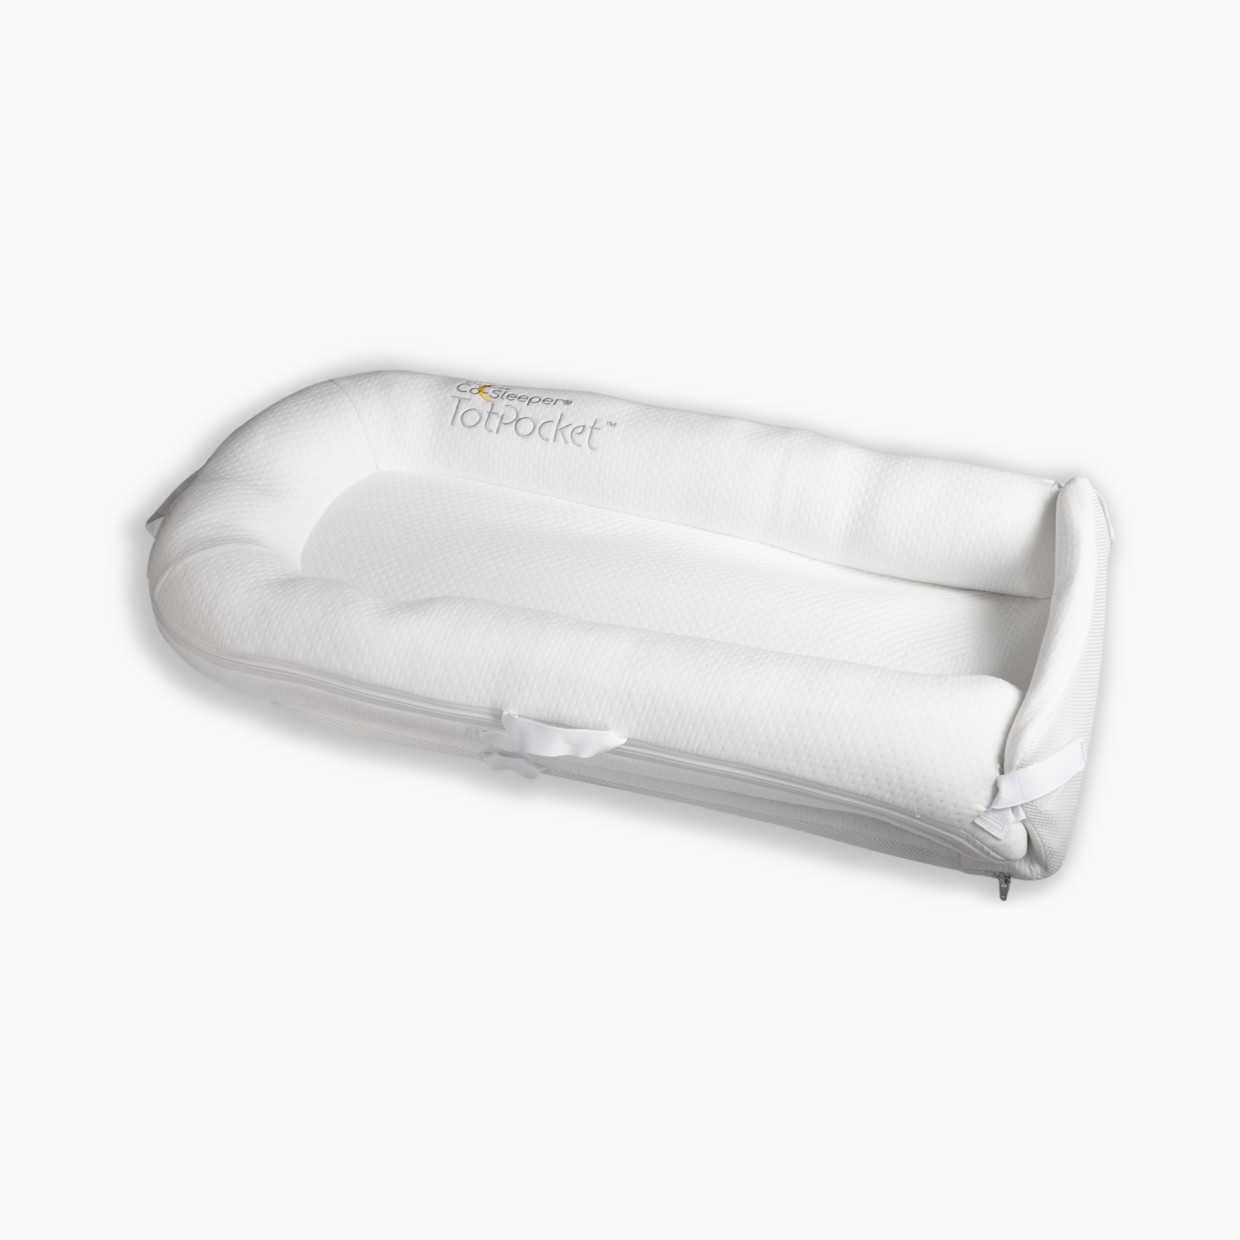 Arm's Reach TotPocket Baby Lounger - Creme.